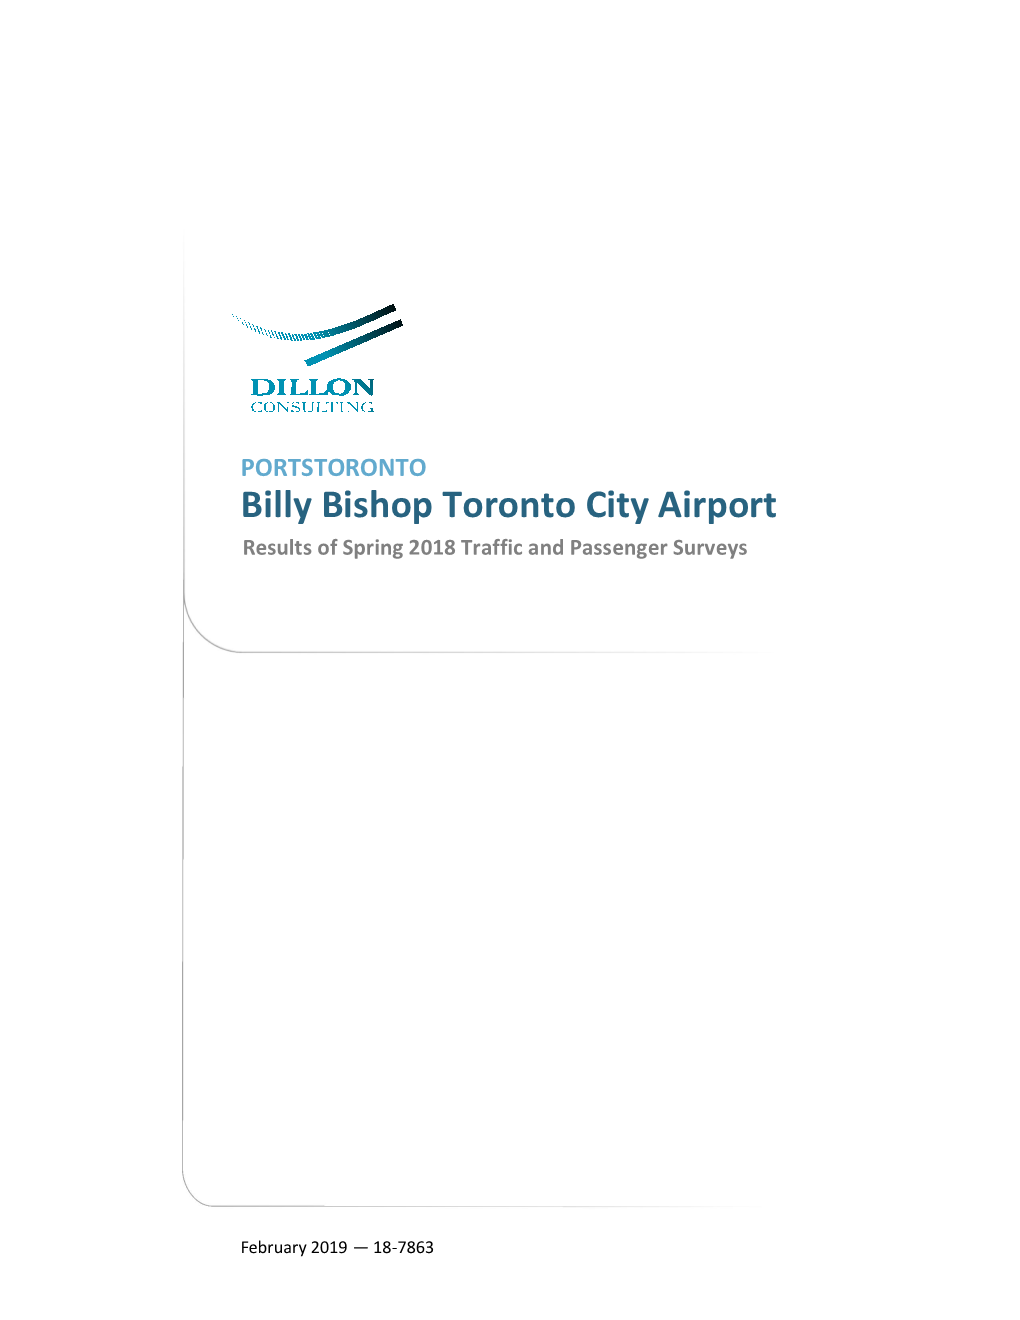 Billy Bishop Toronto City Airport Results of Spring 2018 Traffic and Passenger Surveys